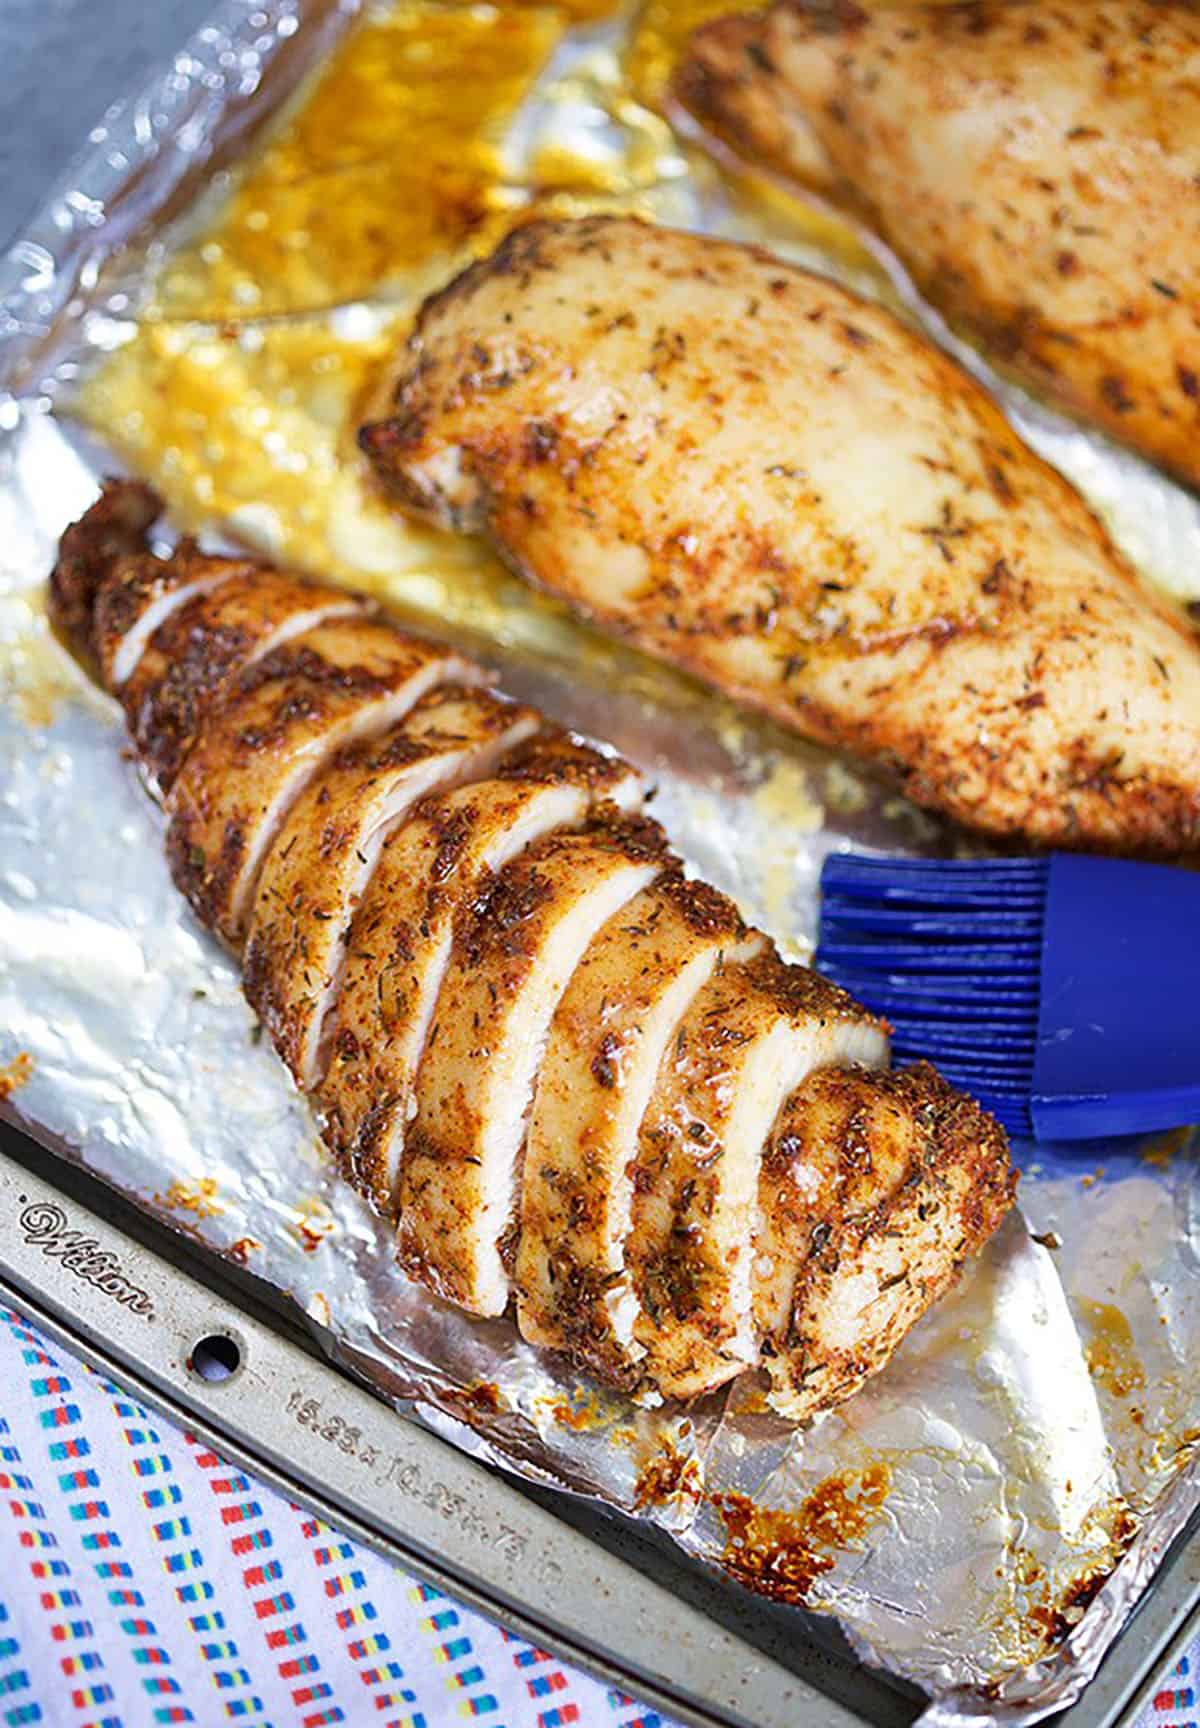 sliced baked chicken breast on a baking sheet with a blue basting brush